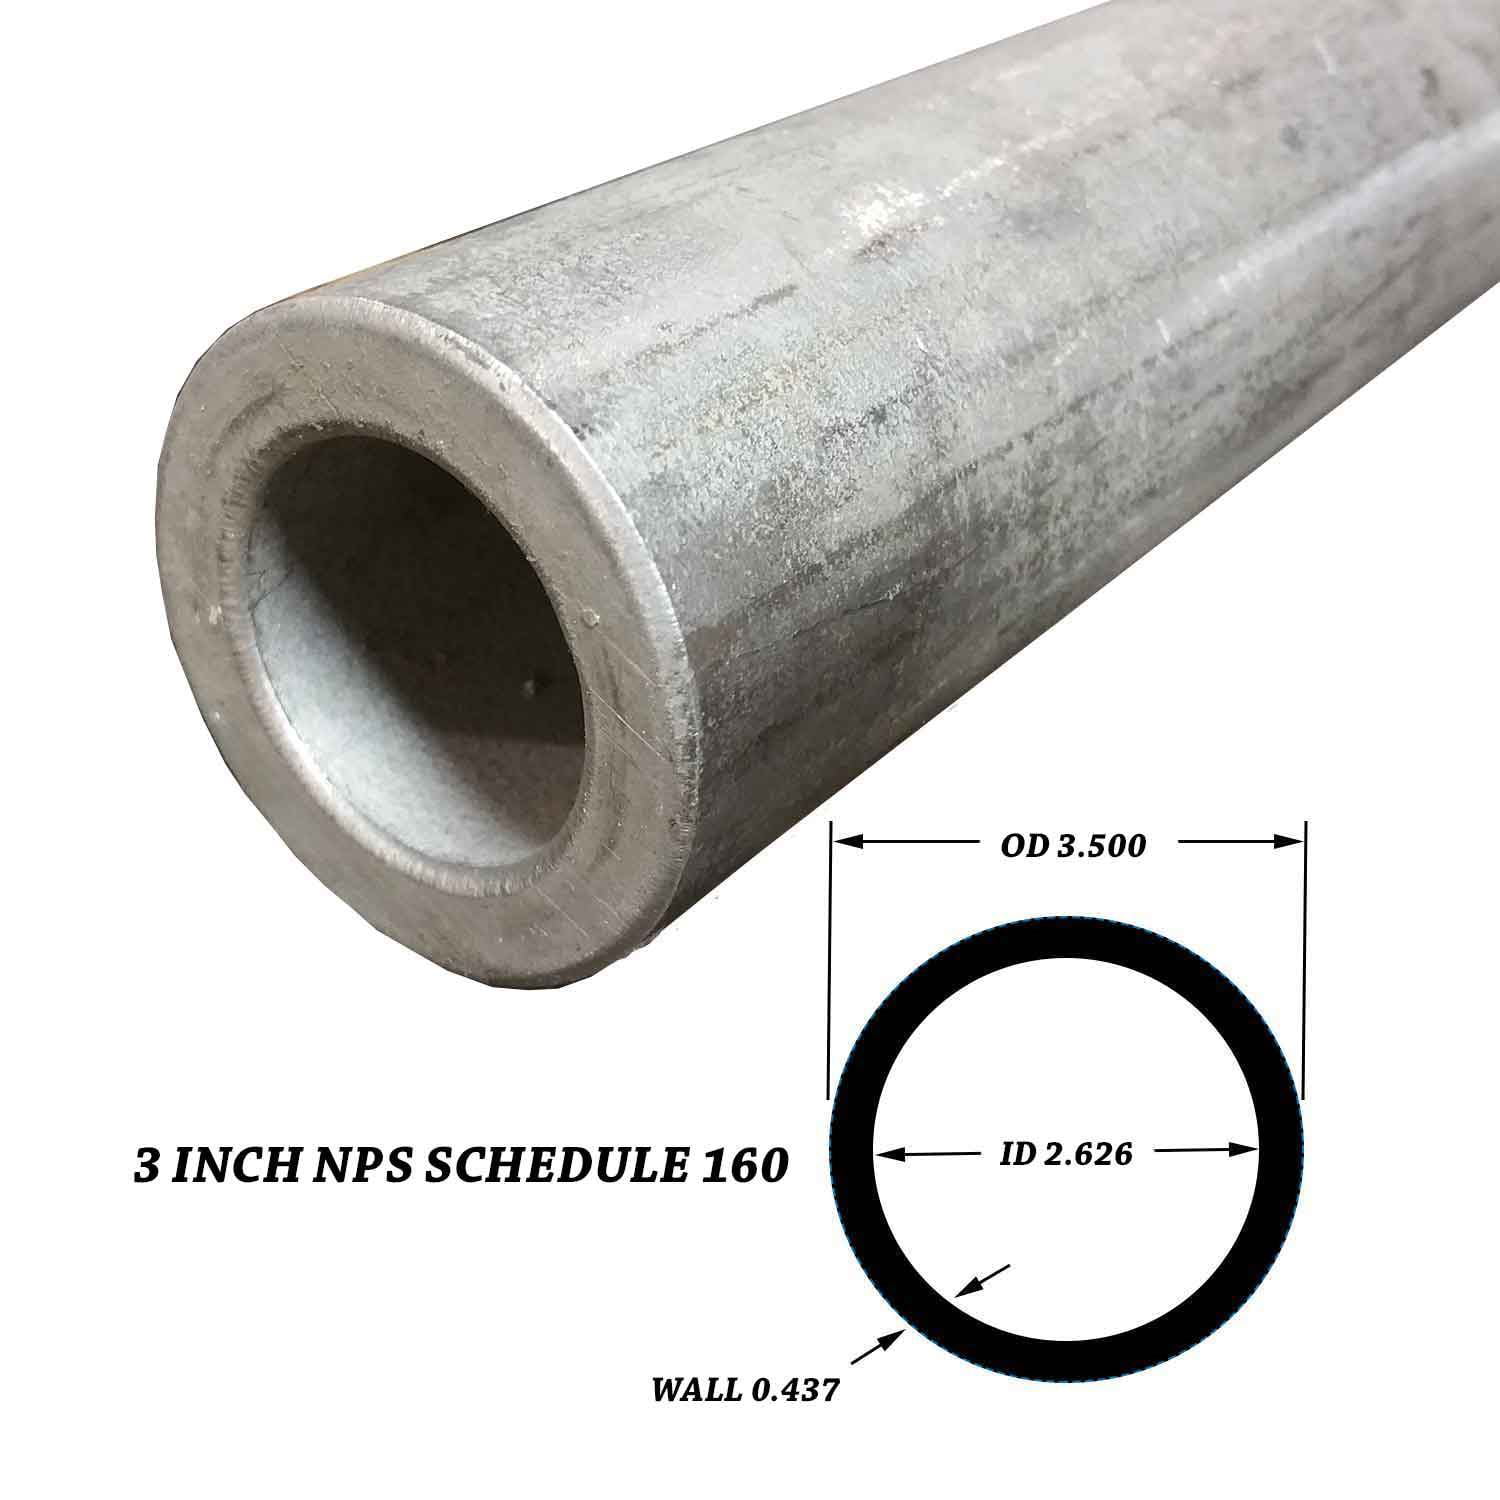 1 1/2" sch 160  304 Stainless Steel Pipe 6' Pc